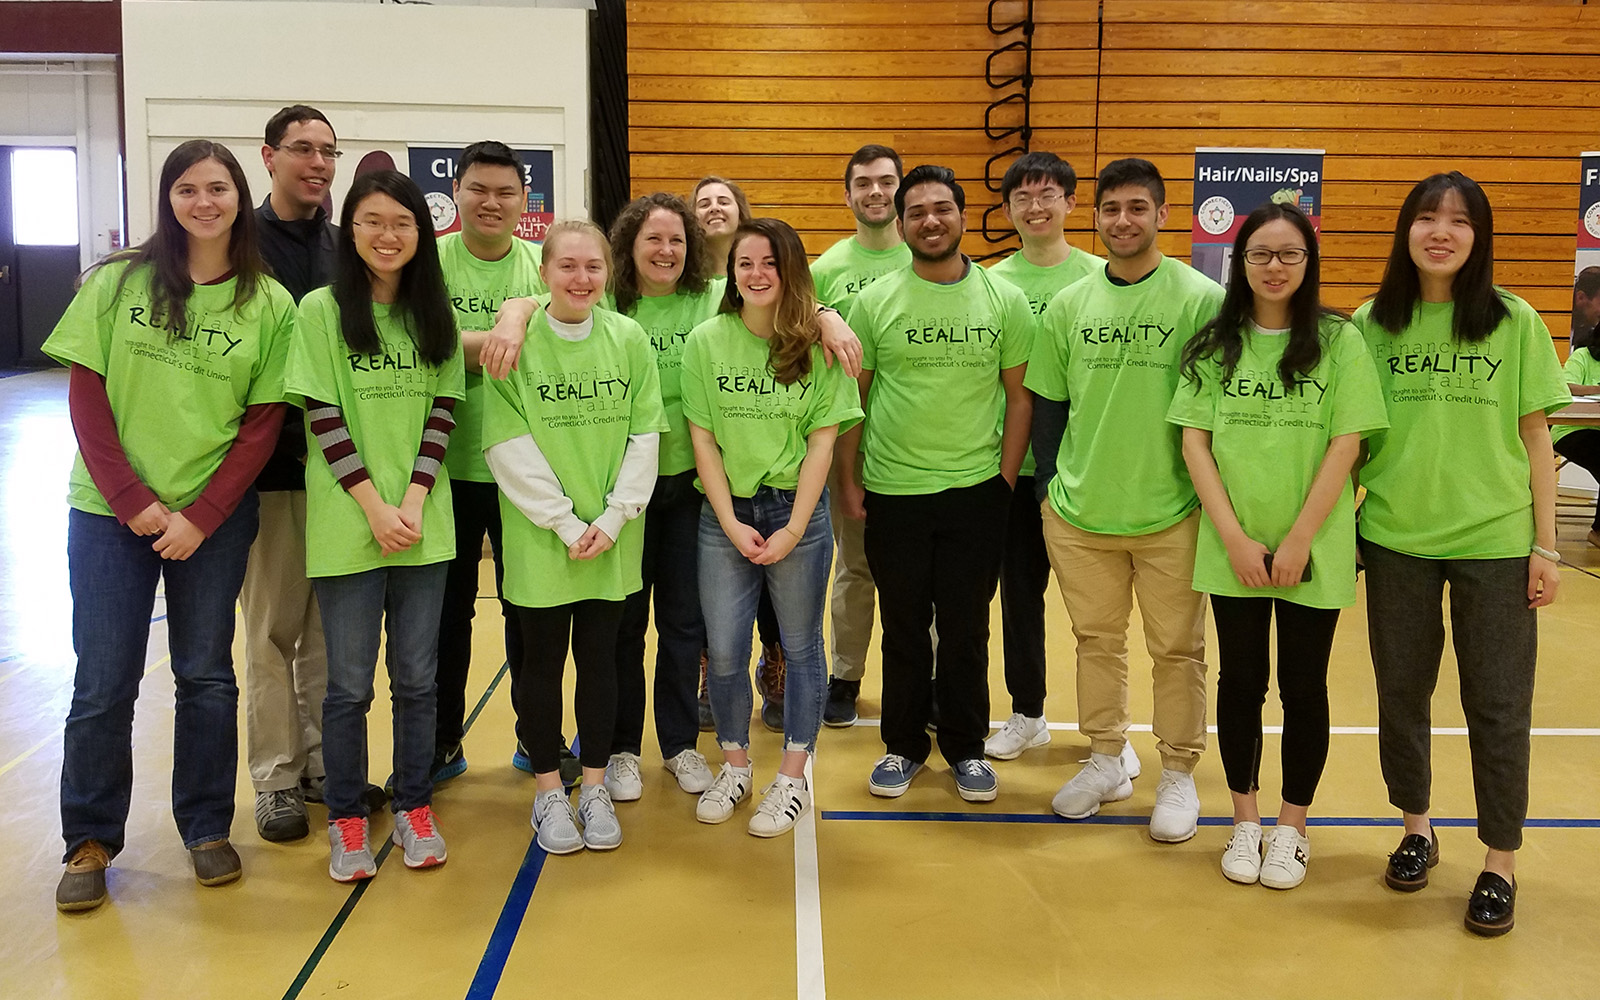 Accounting students taught Hartford teens how to make wise financial choices at the Financial Reality Fair sponsored by Connecticut's Credit Unions. (Leanne Adams/UConn School of Business)